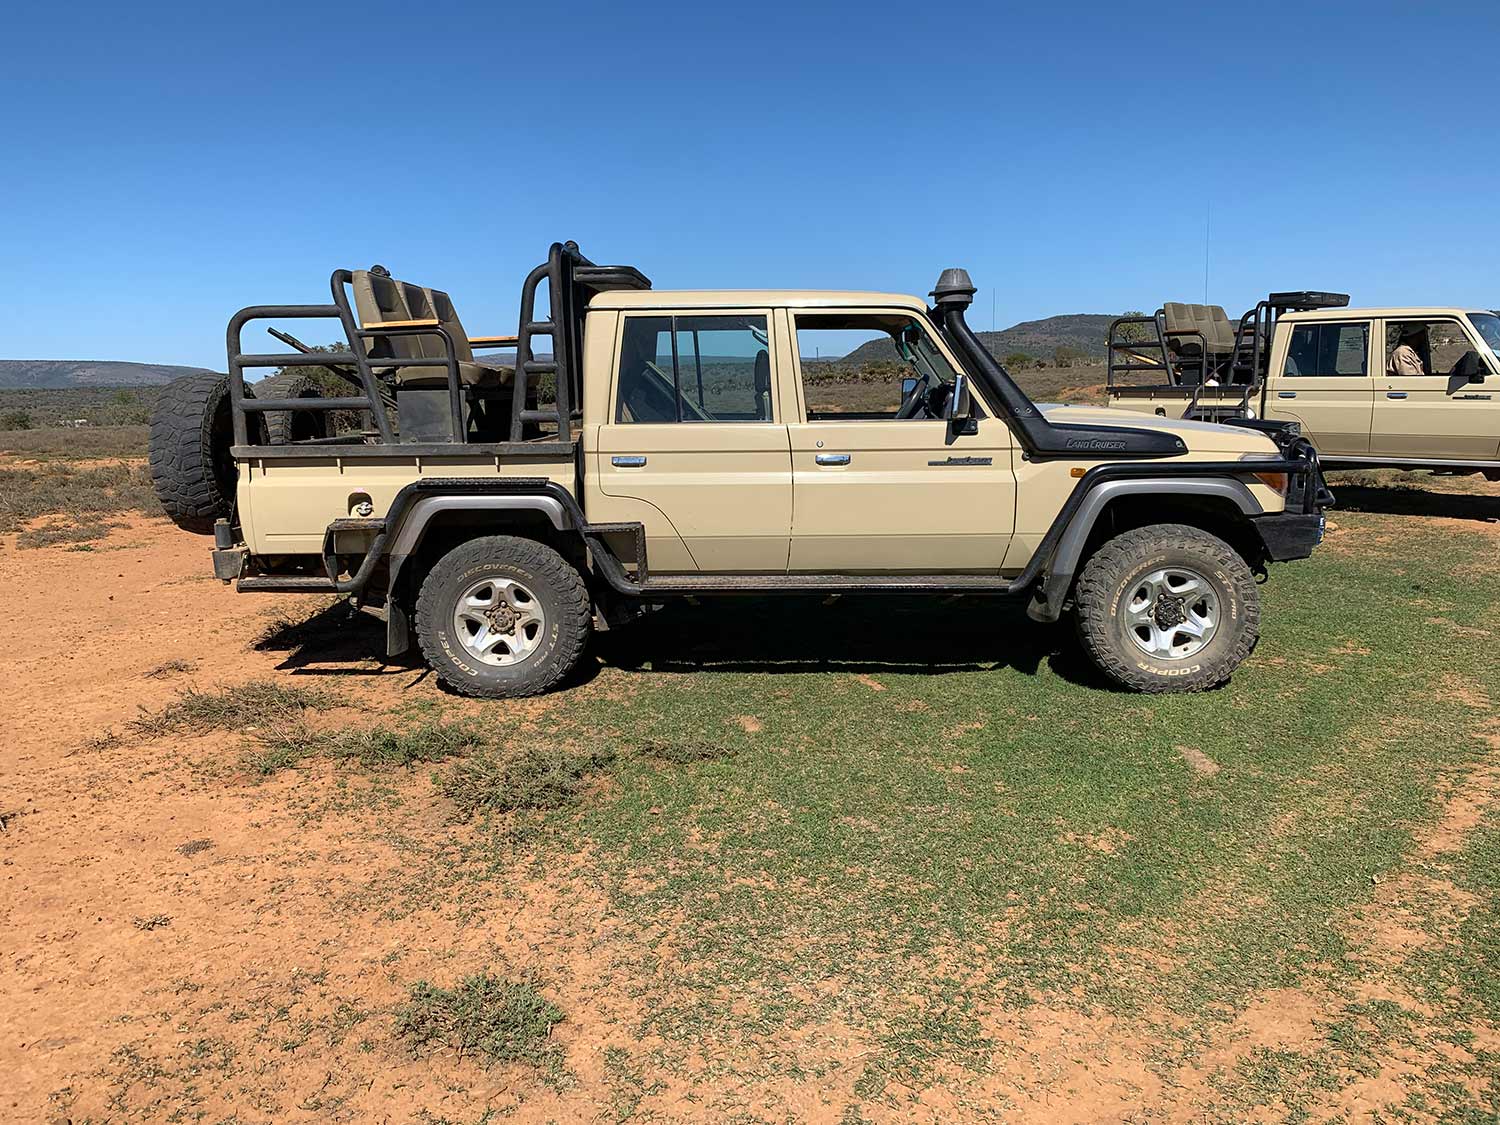 A land cruiser used in Africa hunting trips.